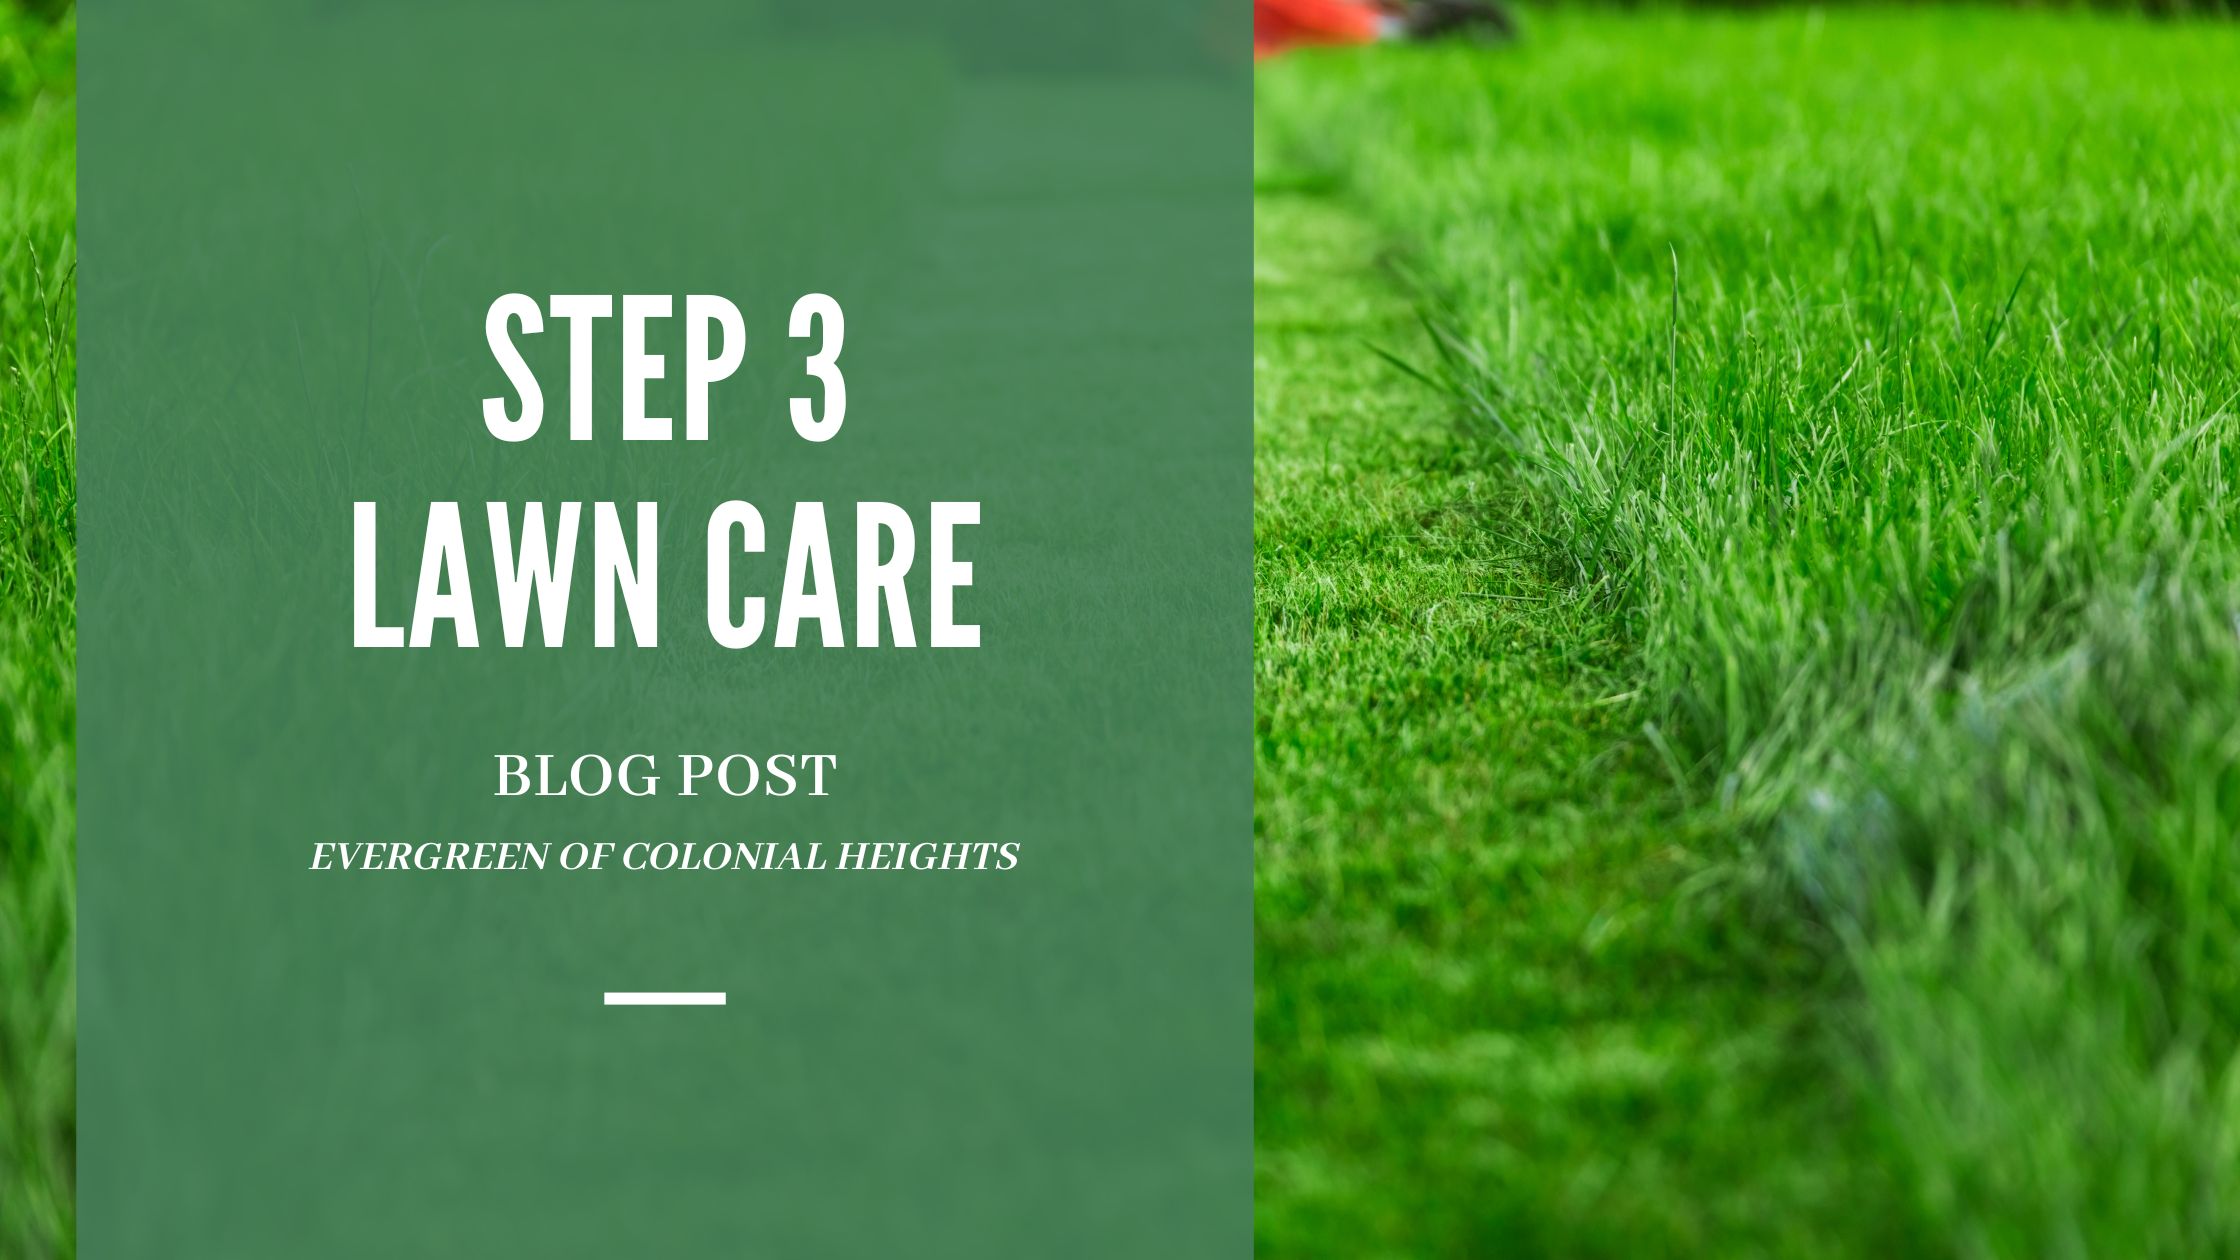 Step 3 Lawn Care